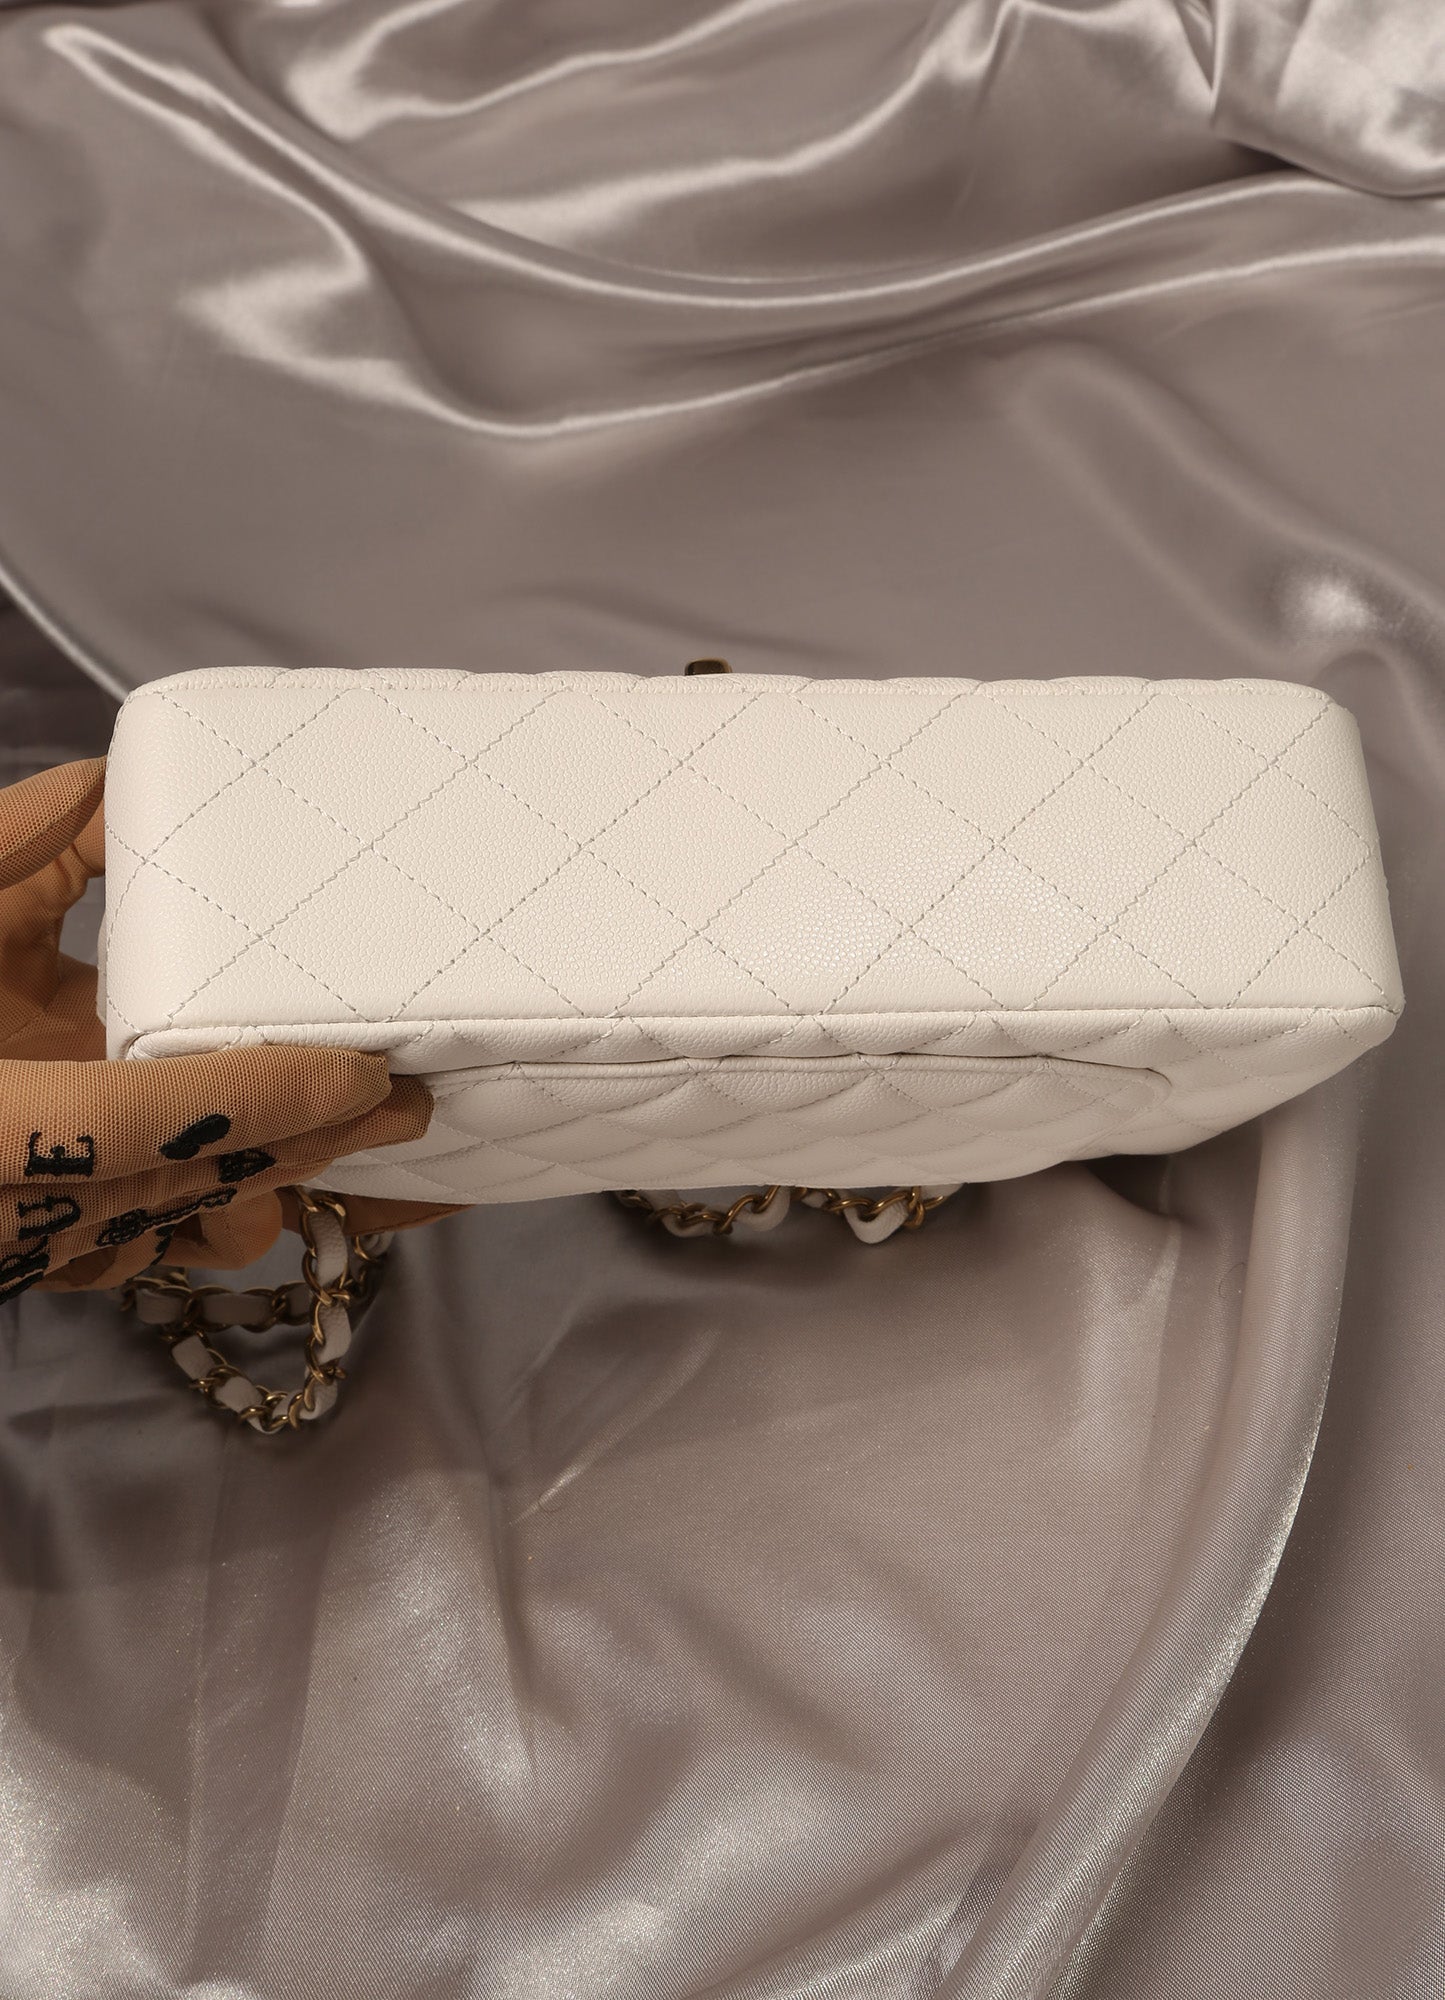 Real or Fake? How to Authenticate Your Chanel 19 Bag 